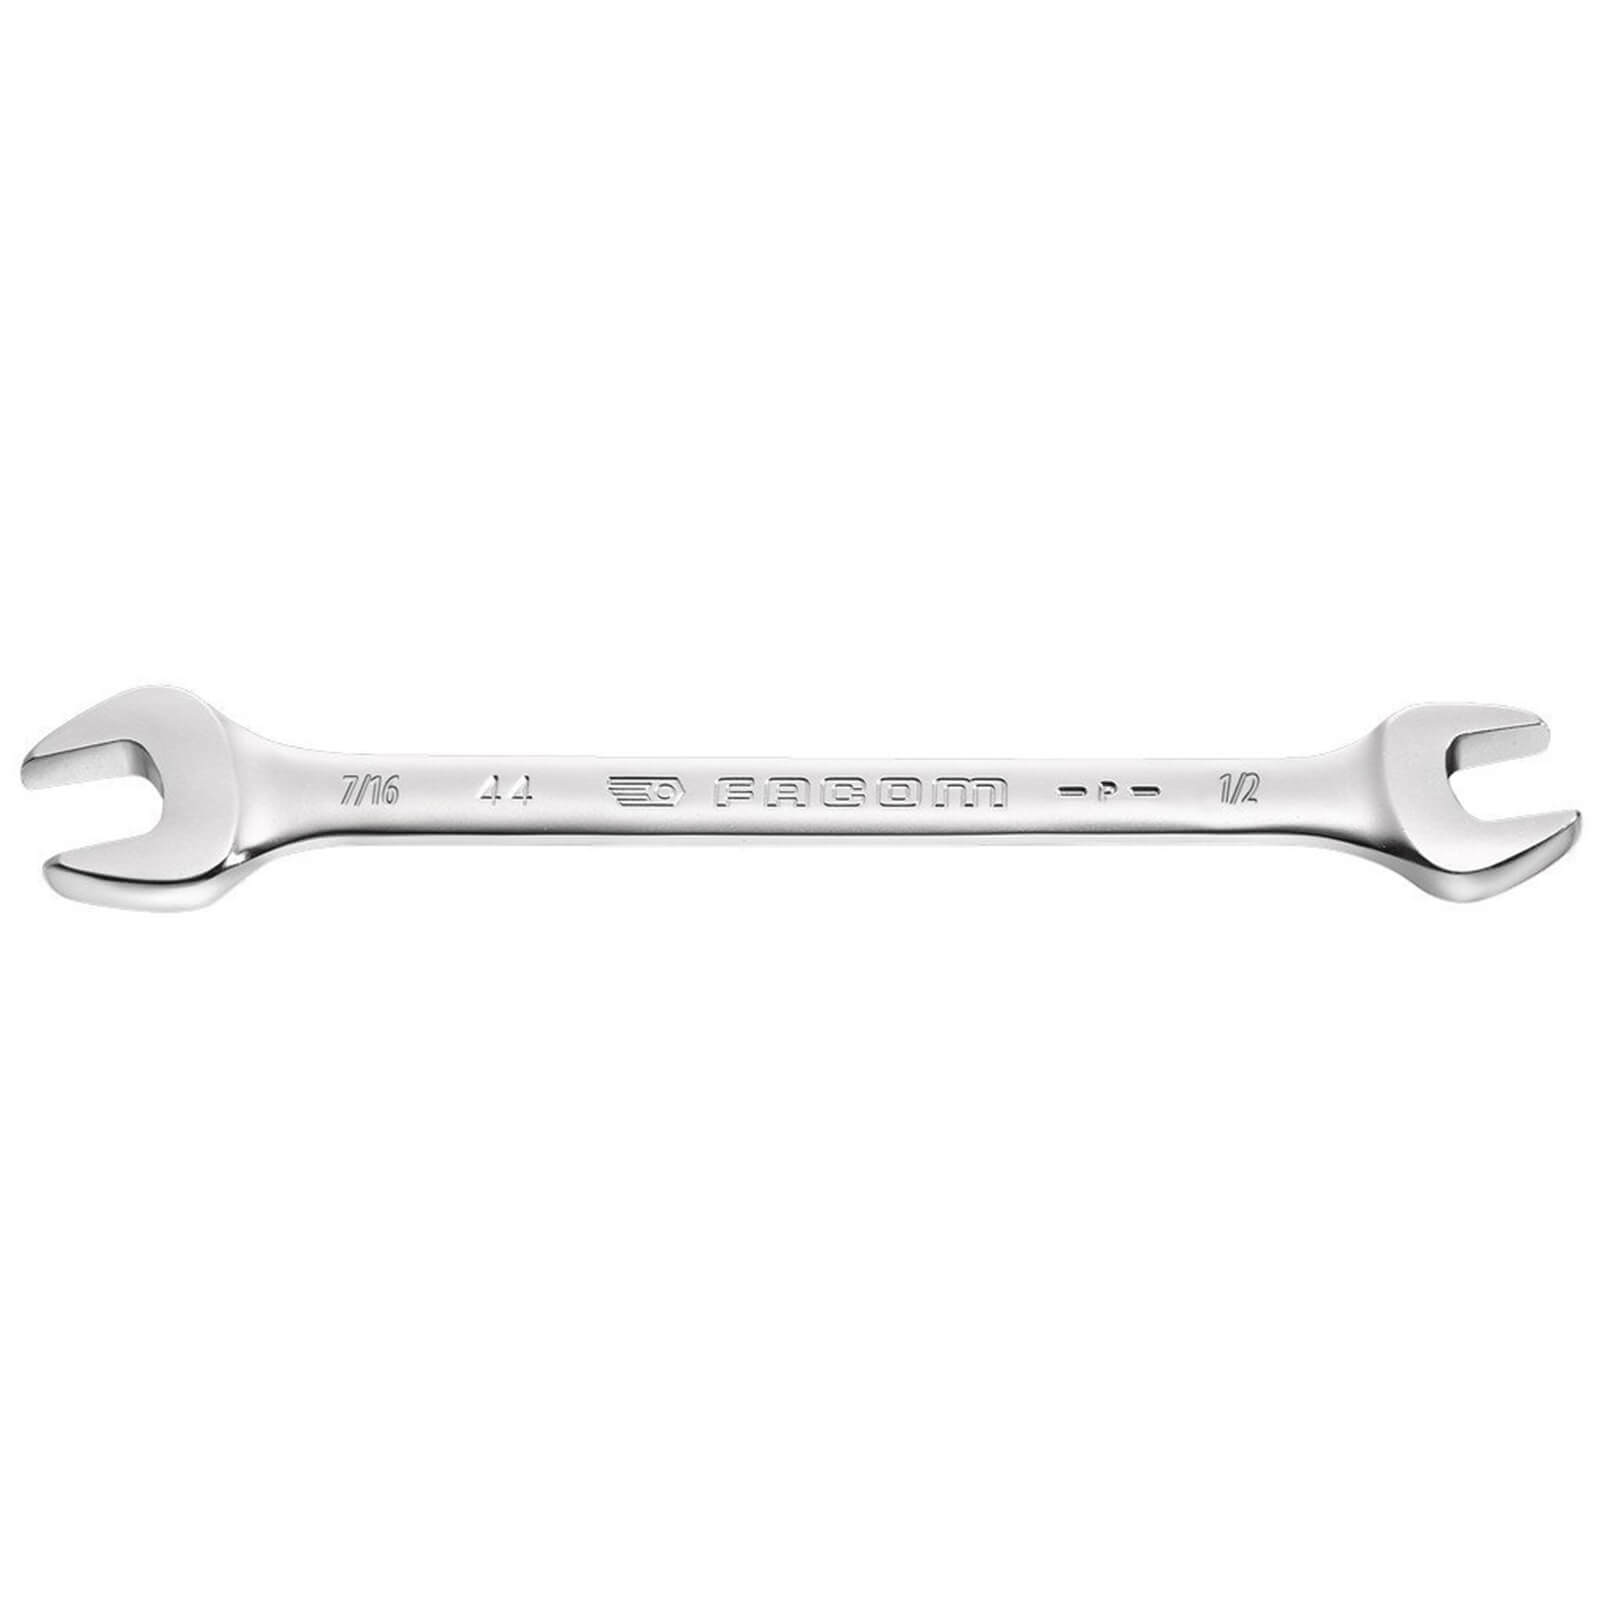 Image of Facom Open Ended Spanner Imperial 1" 1/16" x 1" 1/8"